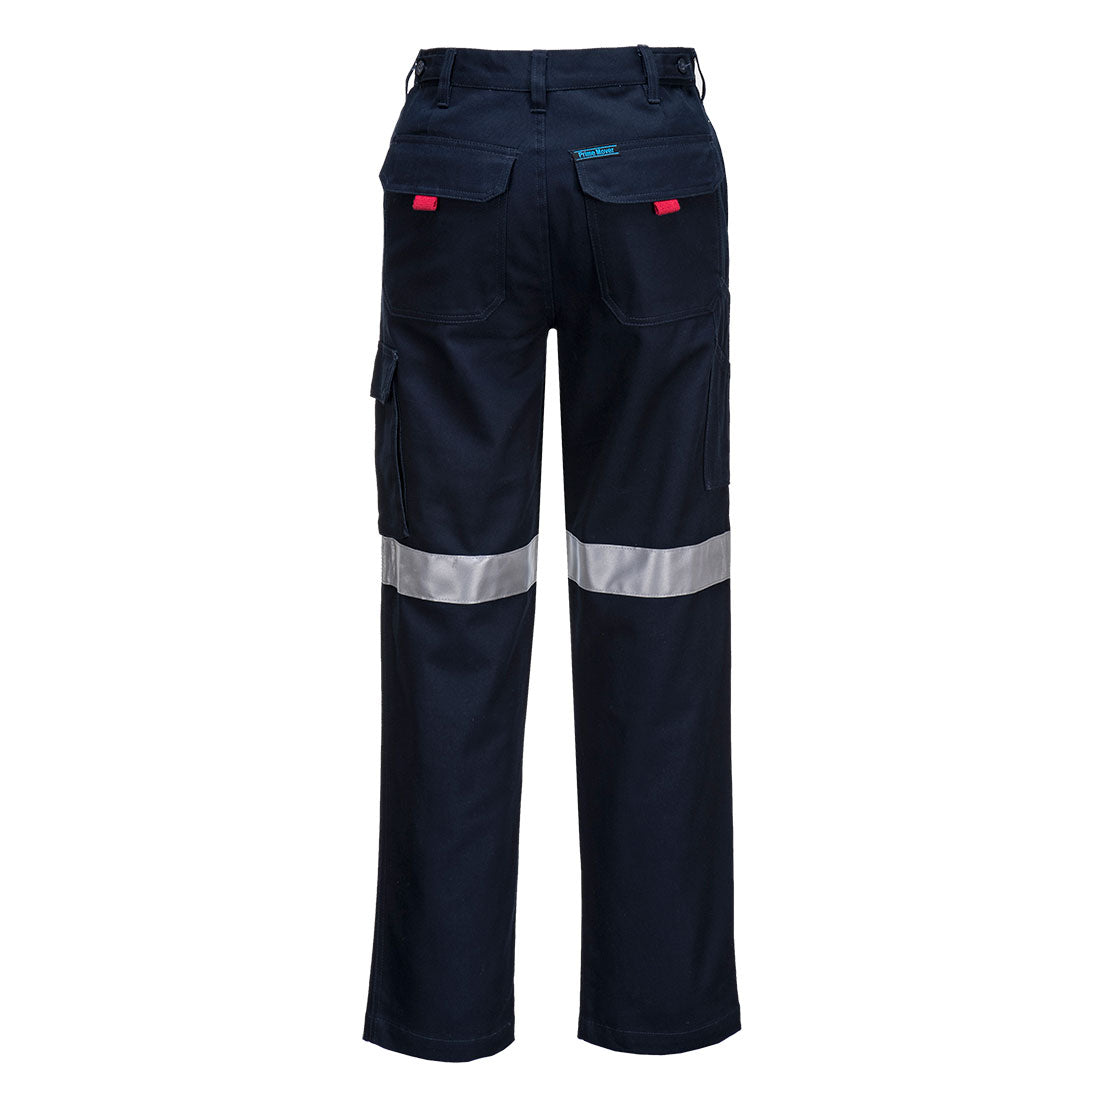 Navy Cargo Pants with Tape - MP701 - Back